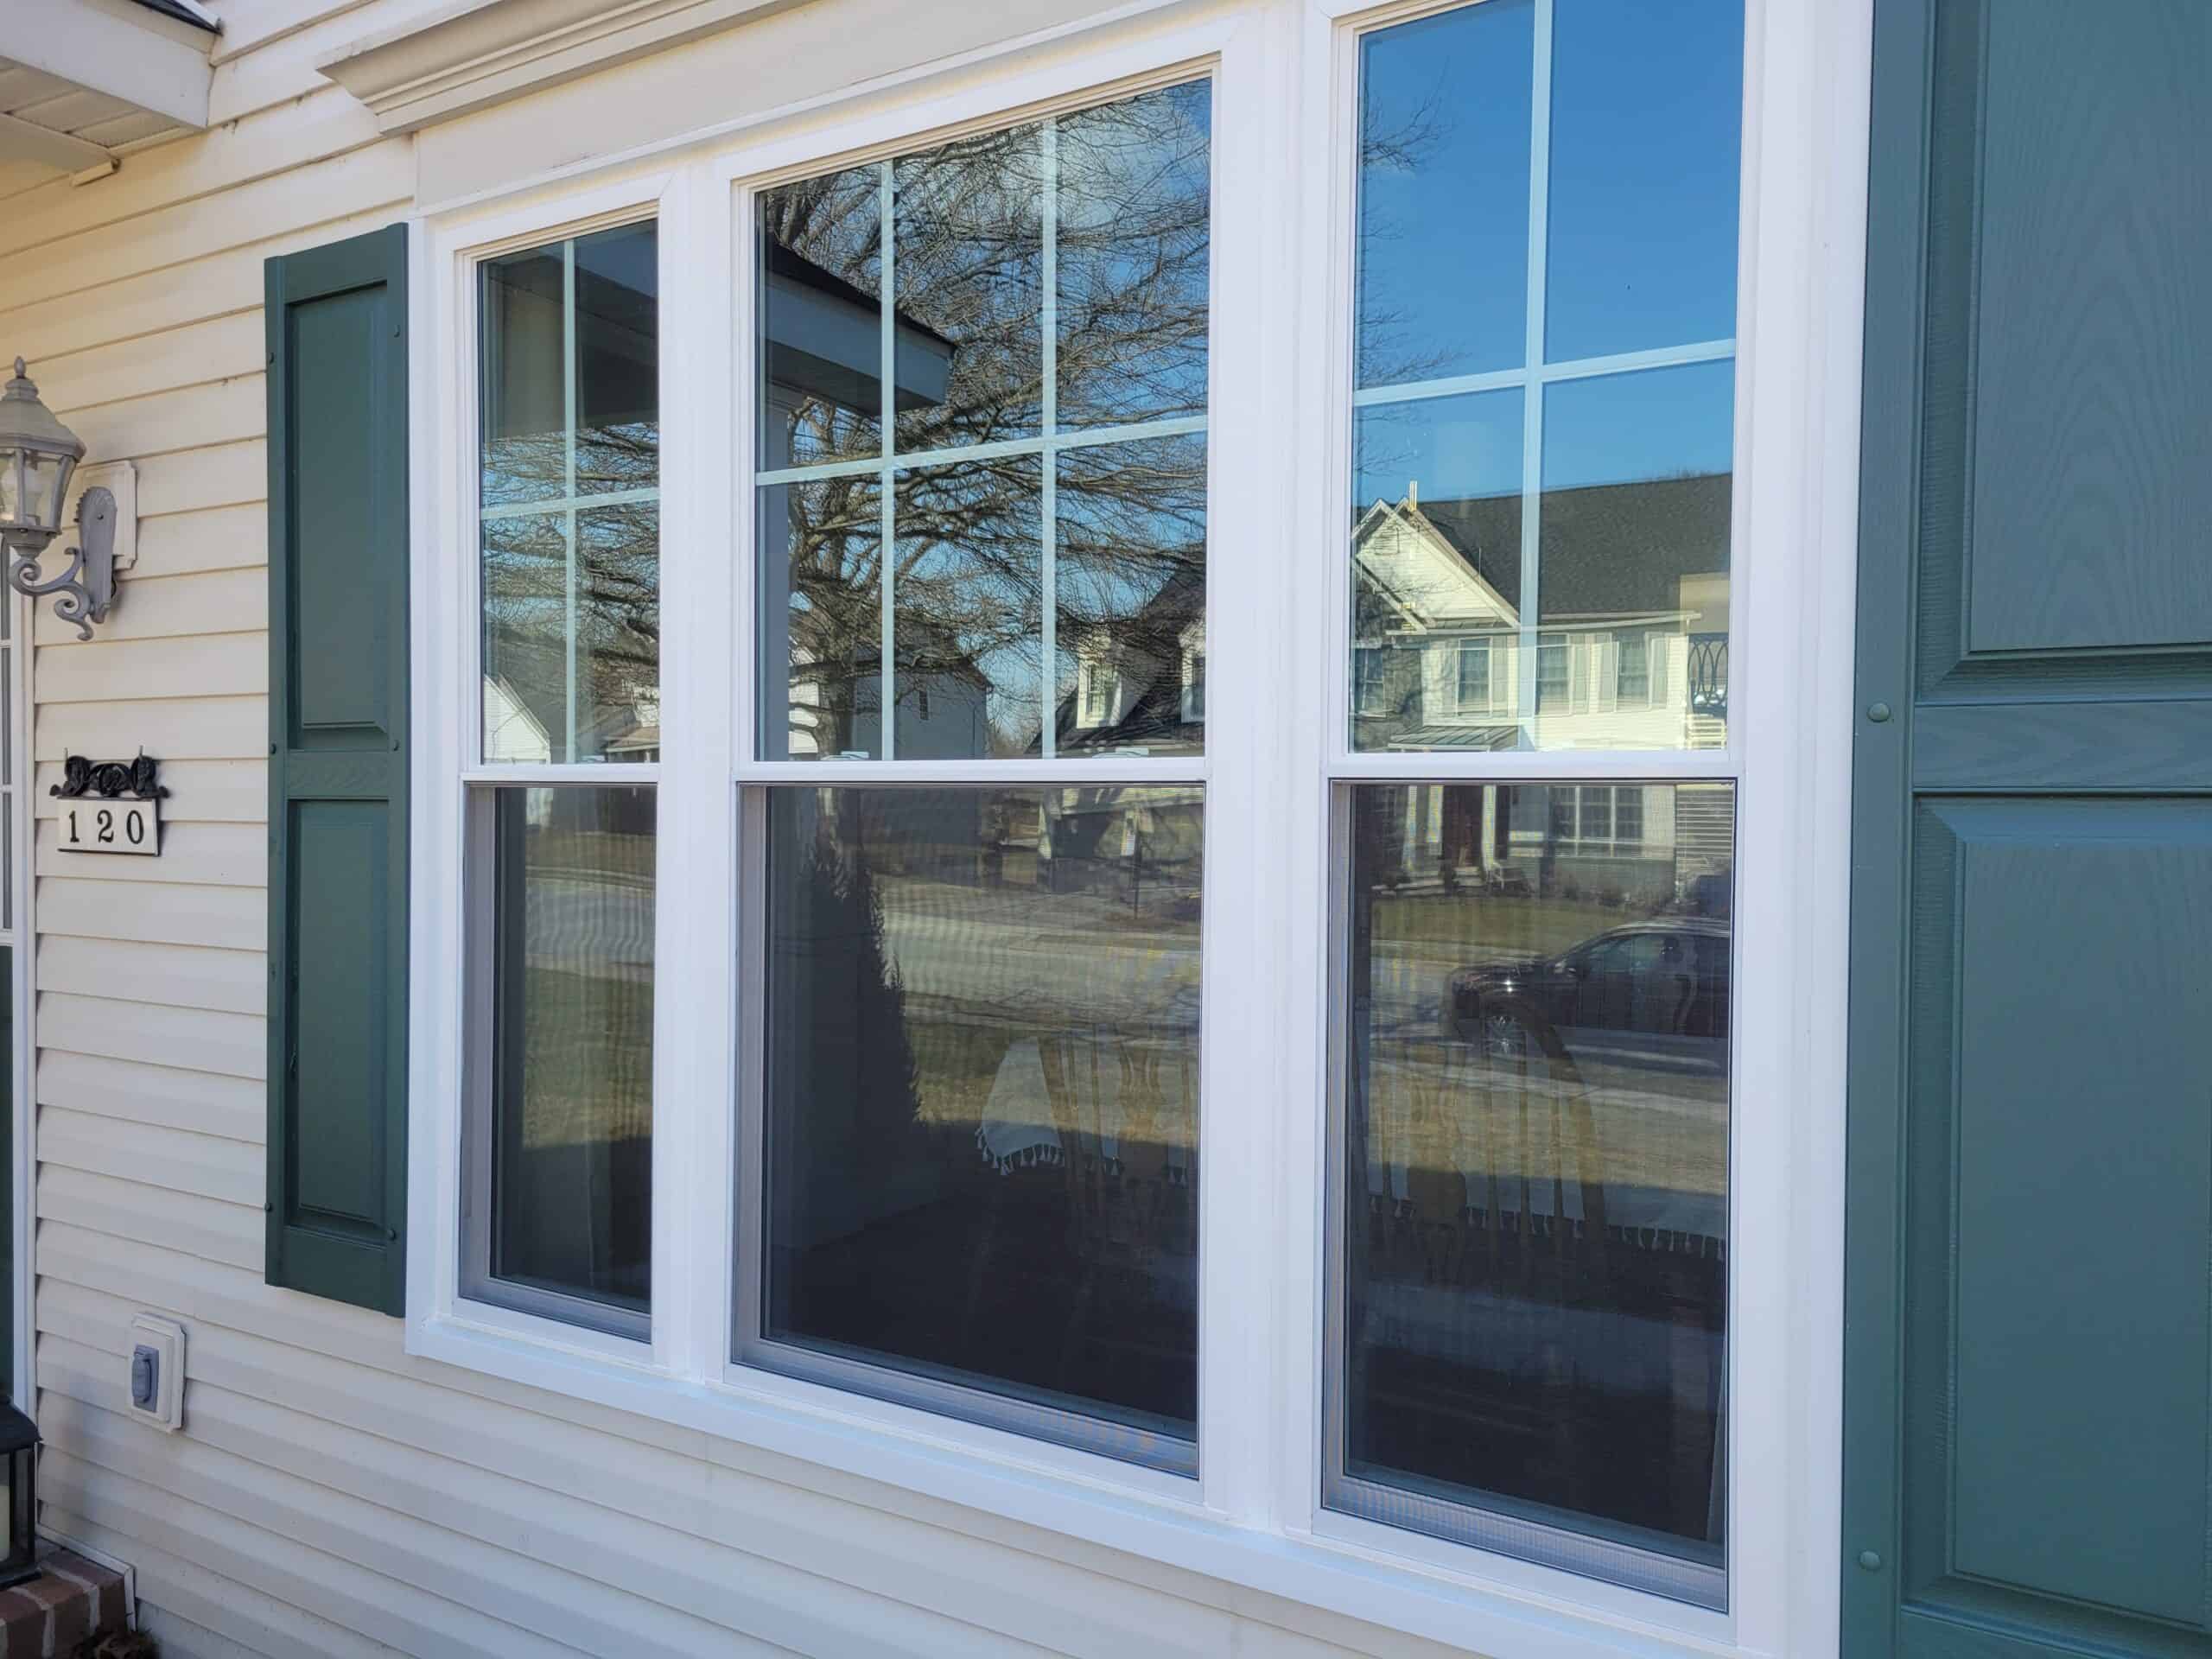 Exterior view of SoftLite replacement windows installed in a home